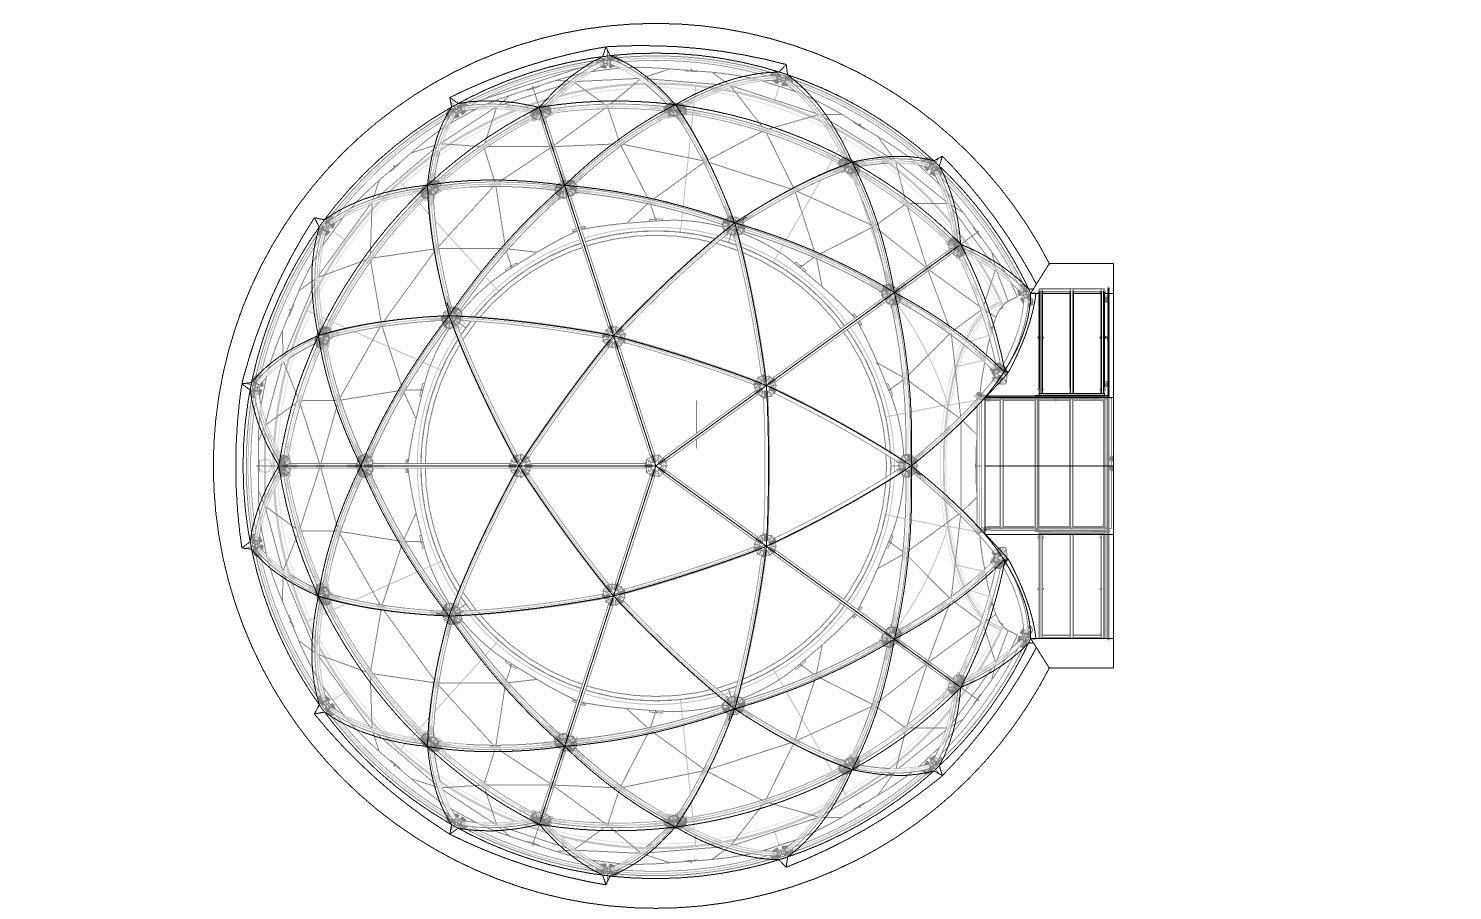 flat diagram of the top of an igloo dome